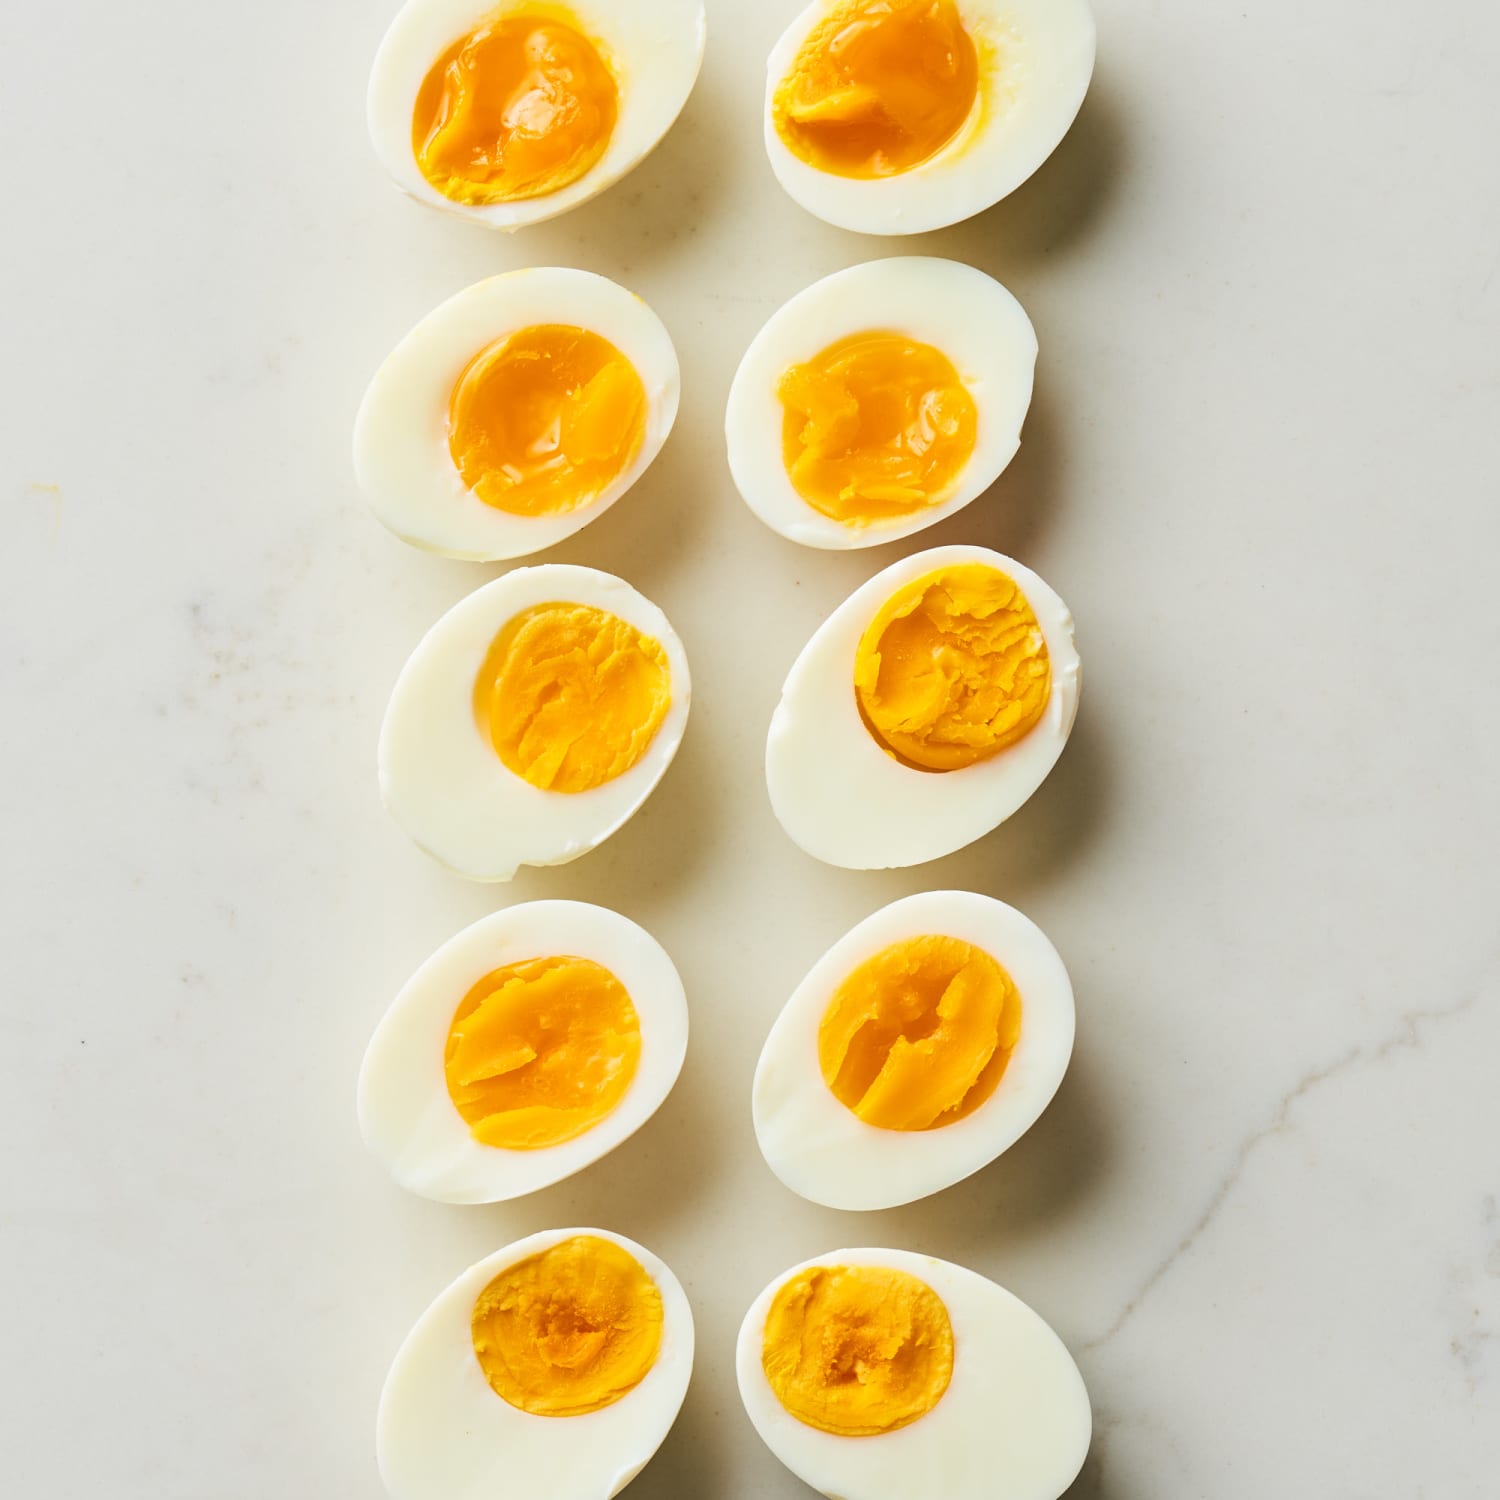 This Clever Hack Makes Chopping Hard-Boiled Eggs Quick & Easy